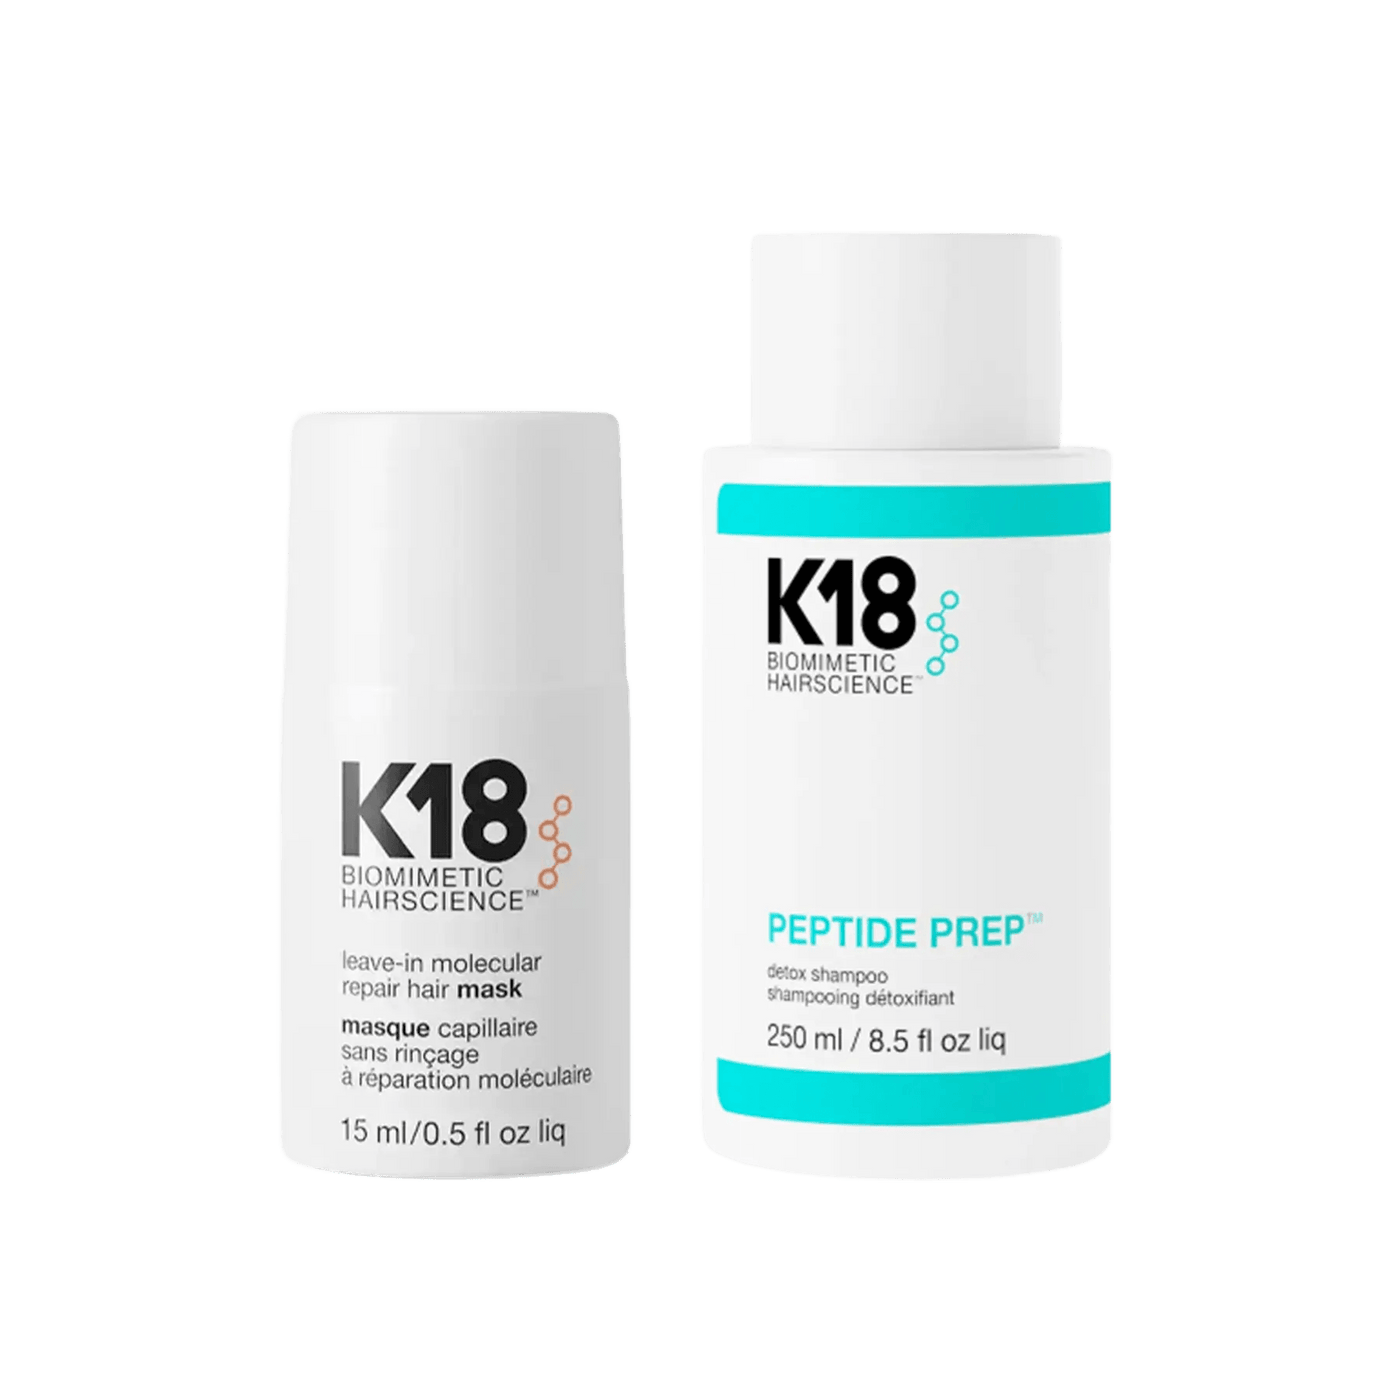 Detoxifying Shampoo (250Ml) + Molecular Repair Leave-in Mask (15Ml) K18 Boutique Deauville